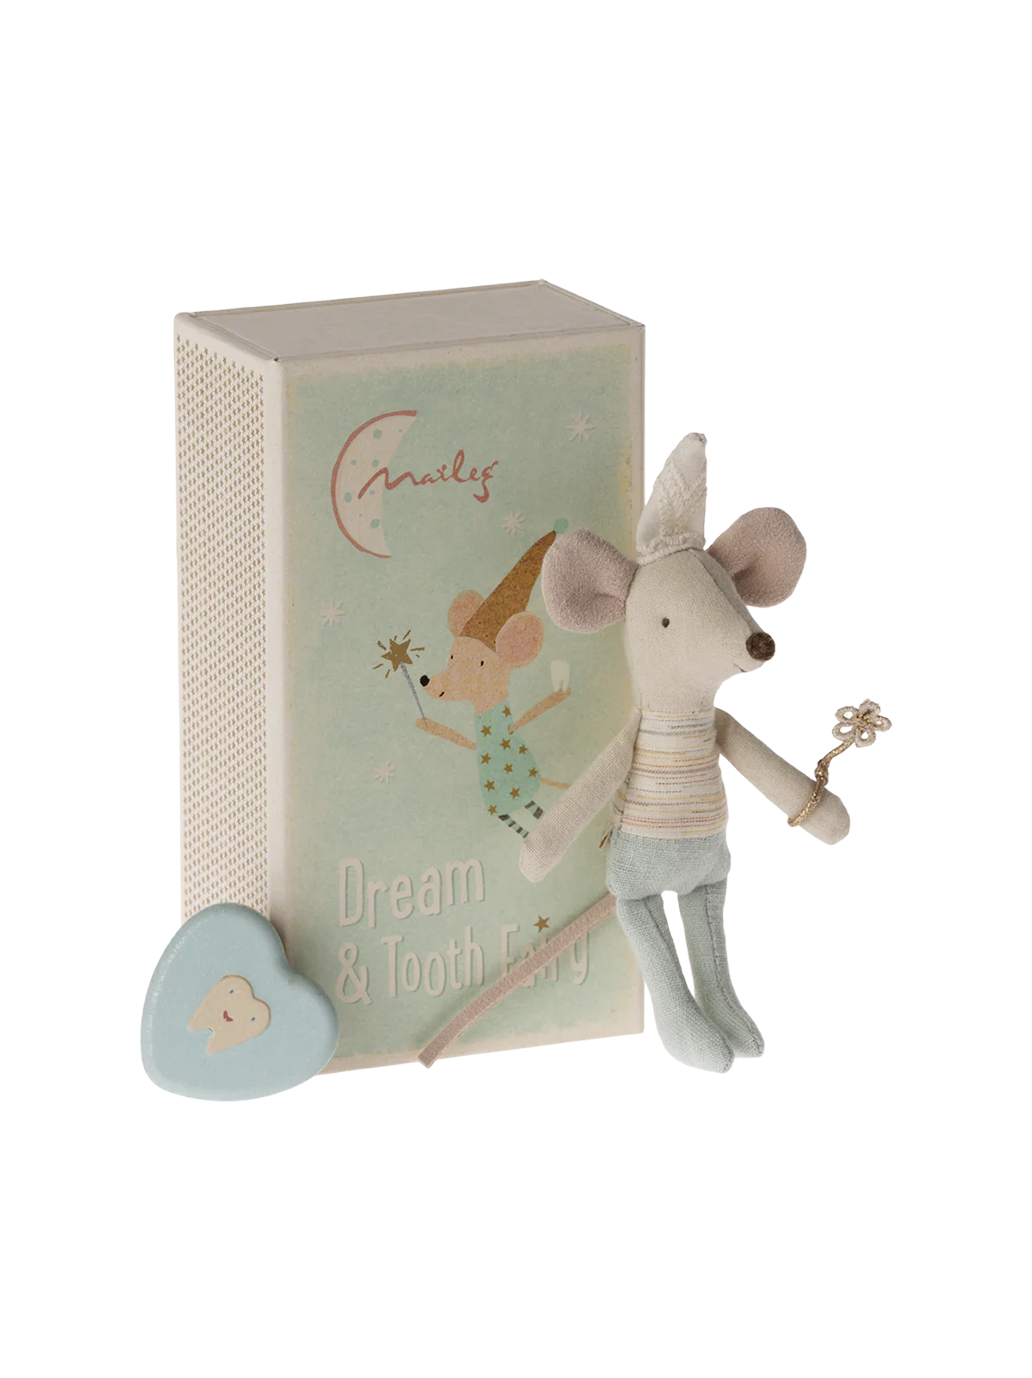 Tooth fairy mouse in a box